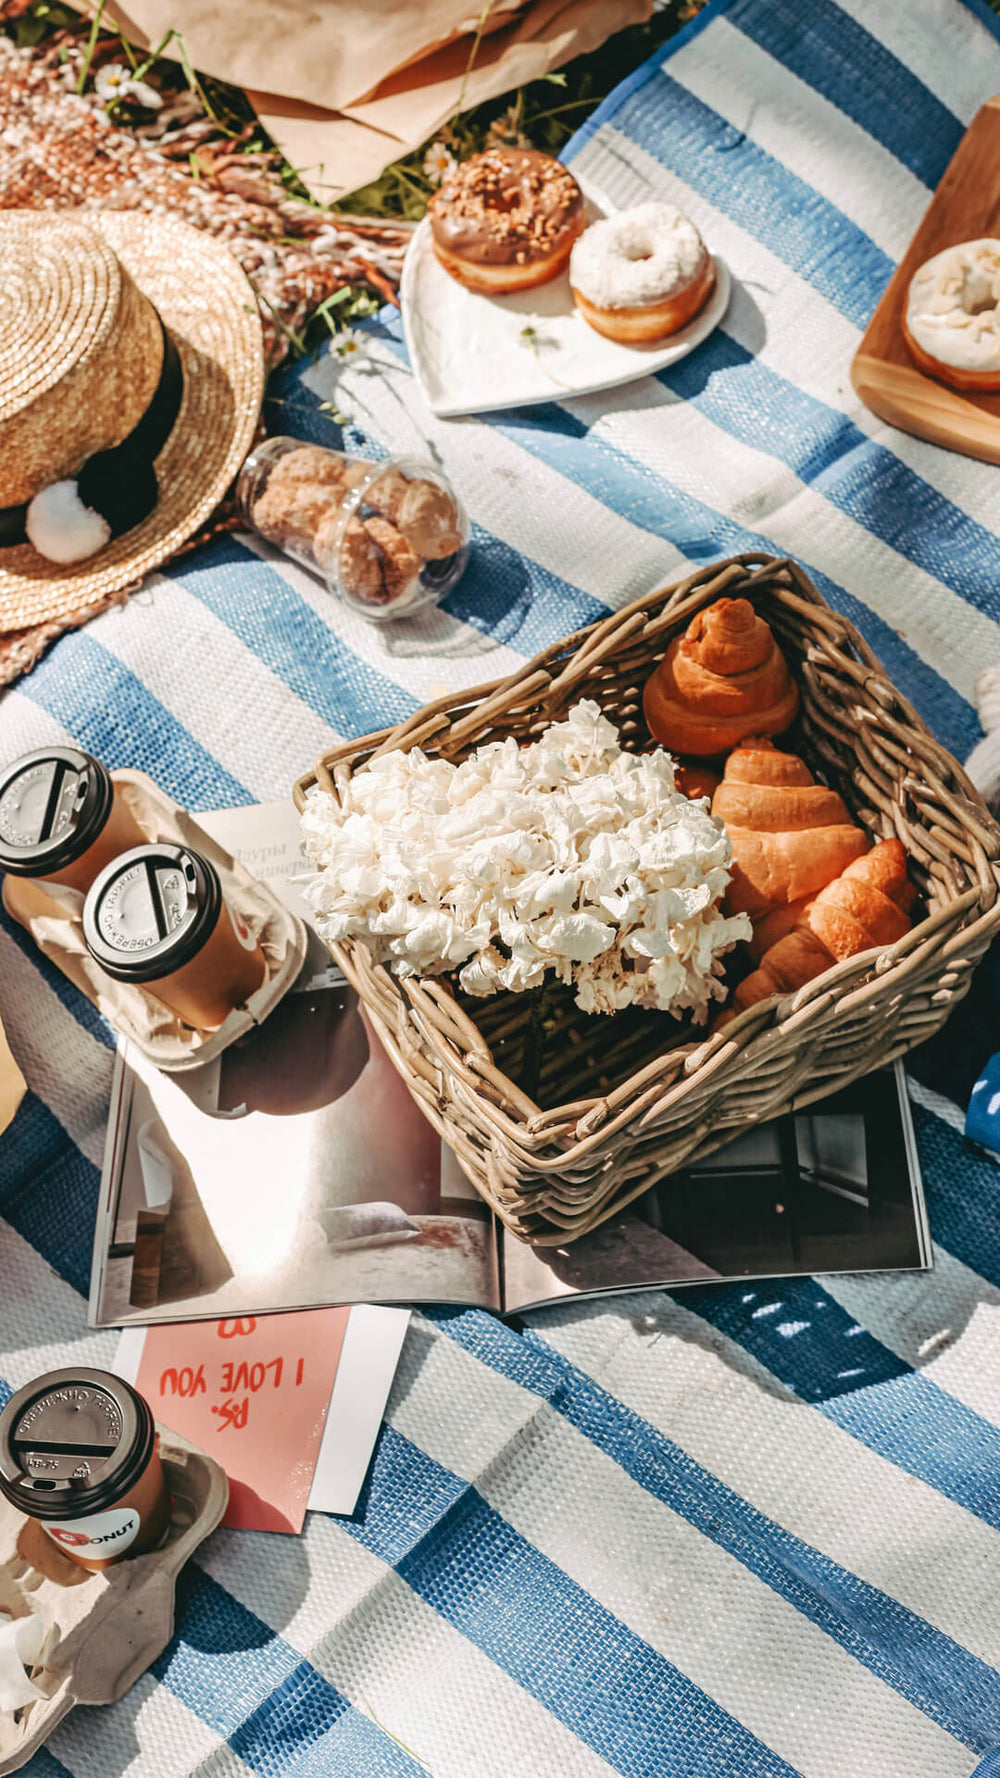 Budget-friendly picnic accessories